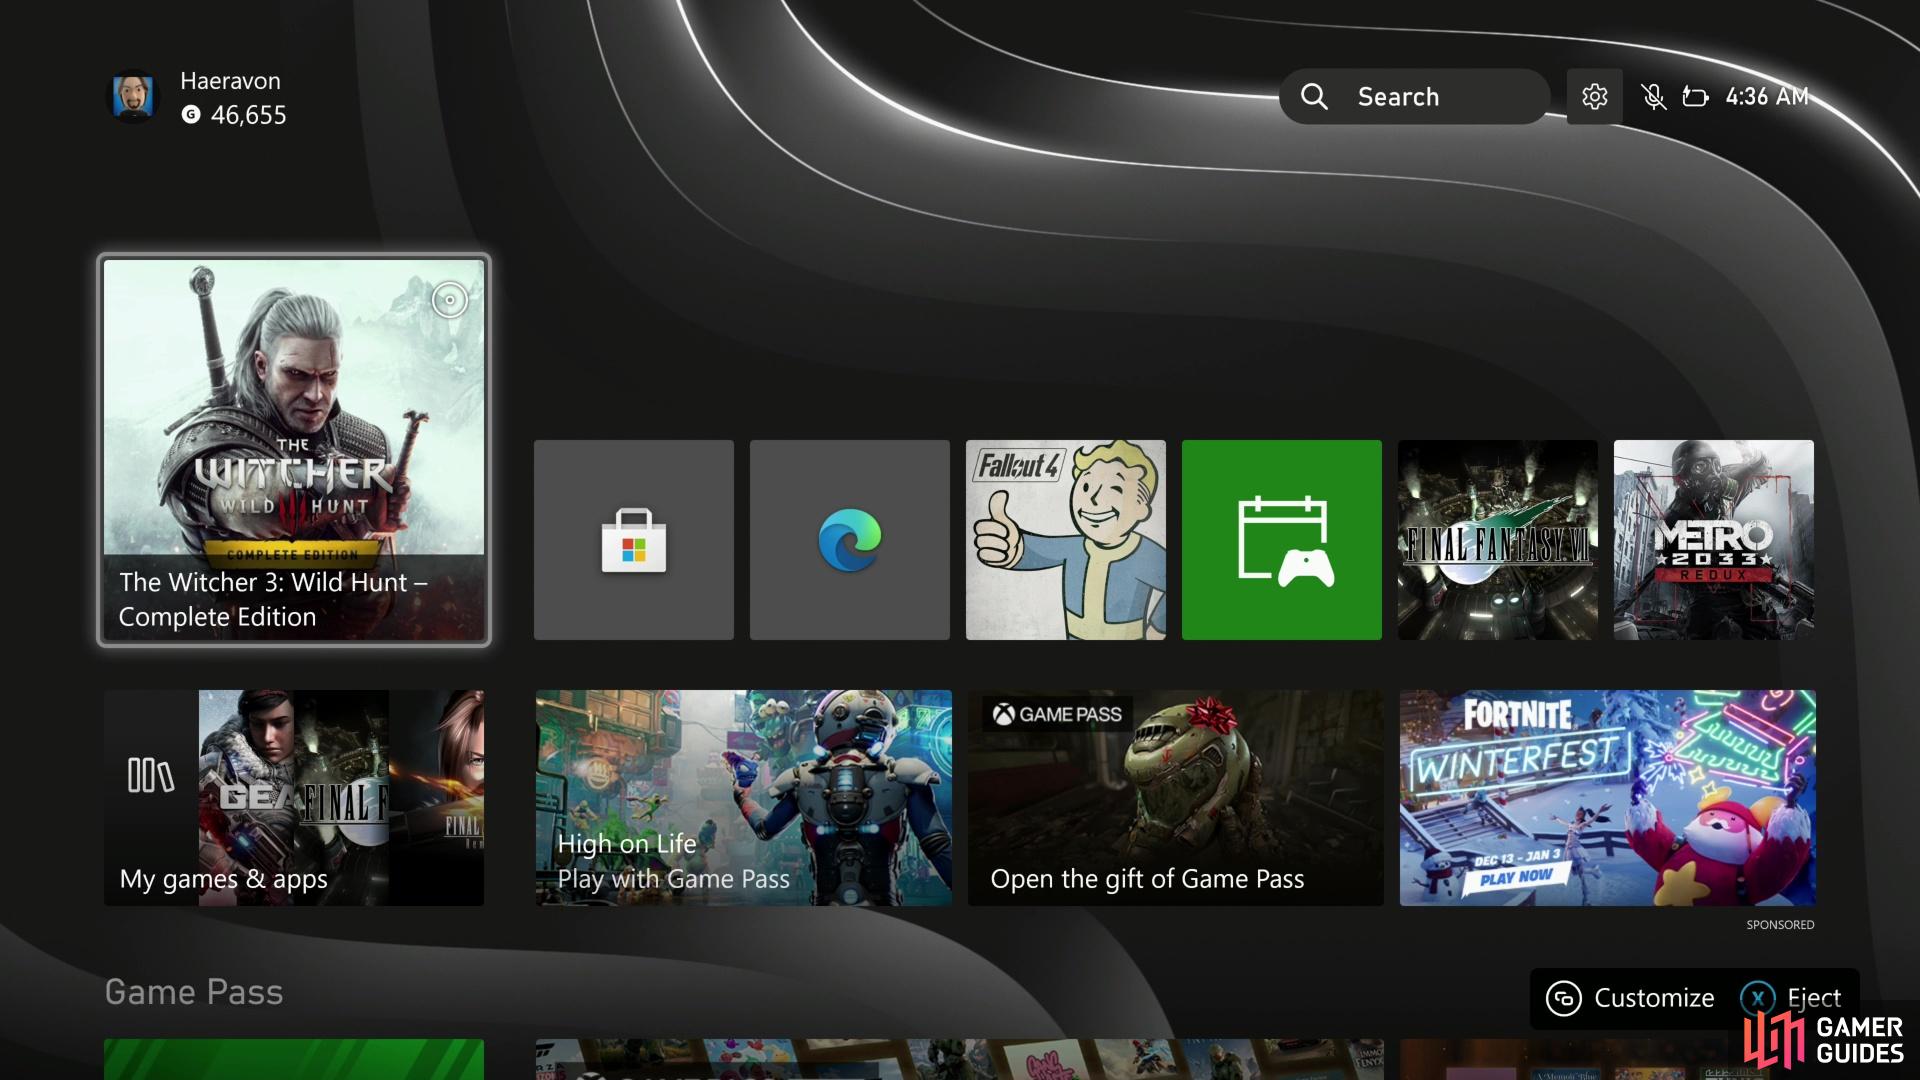 Downloading the game on Xbox is a pretty straight-forward endeavor - patch 4.0 just counts as a simple update.